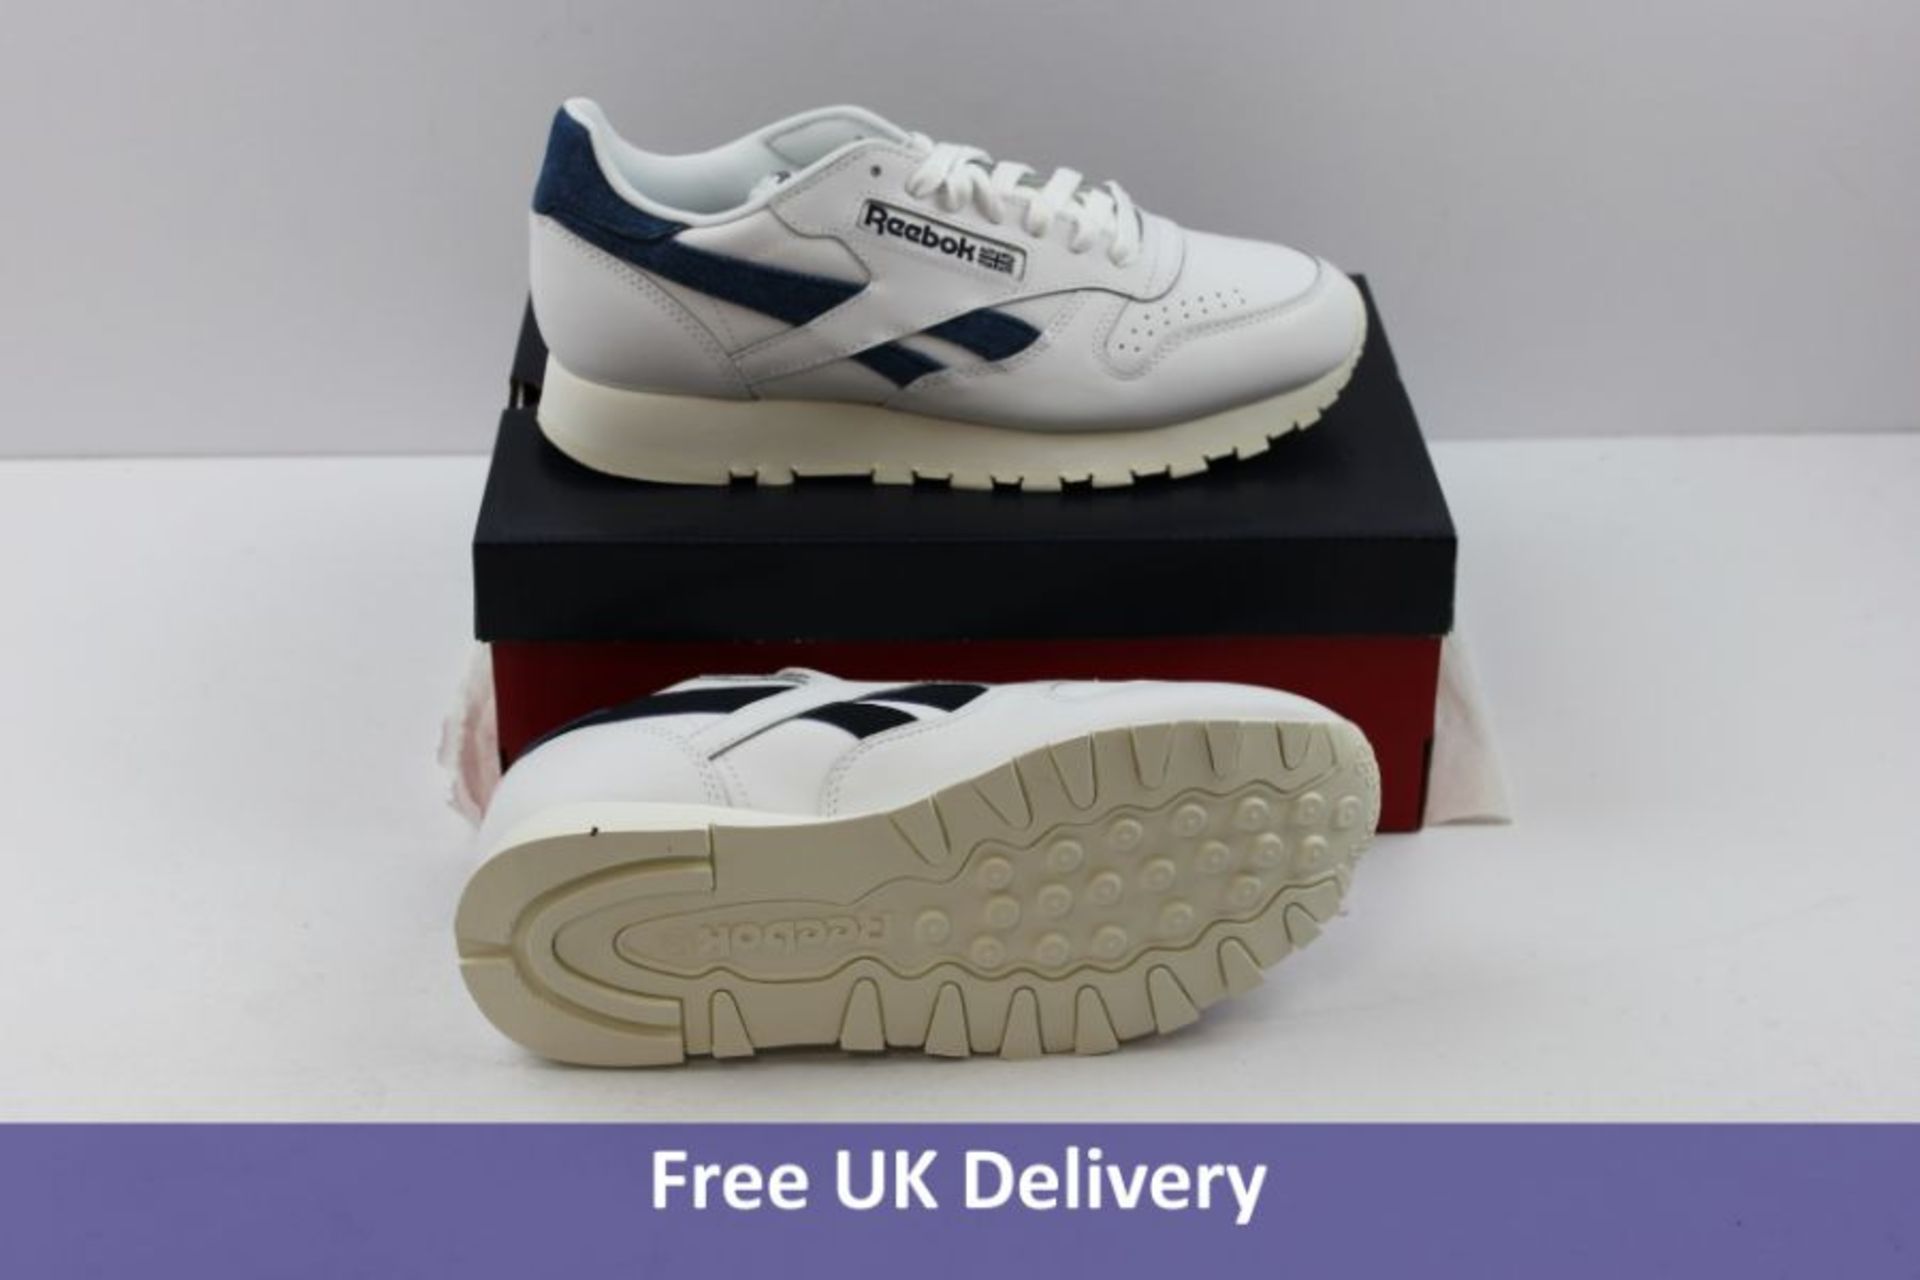 Reebok Men's Classic Trainers, White and Blue, UK 5